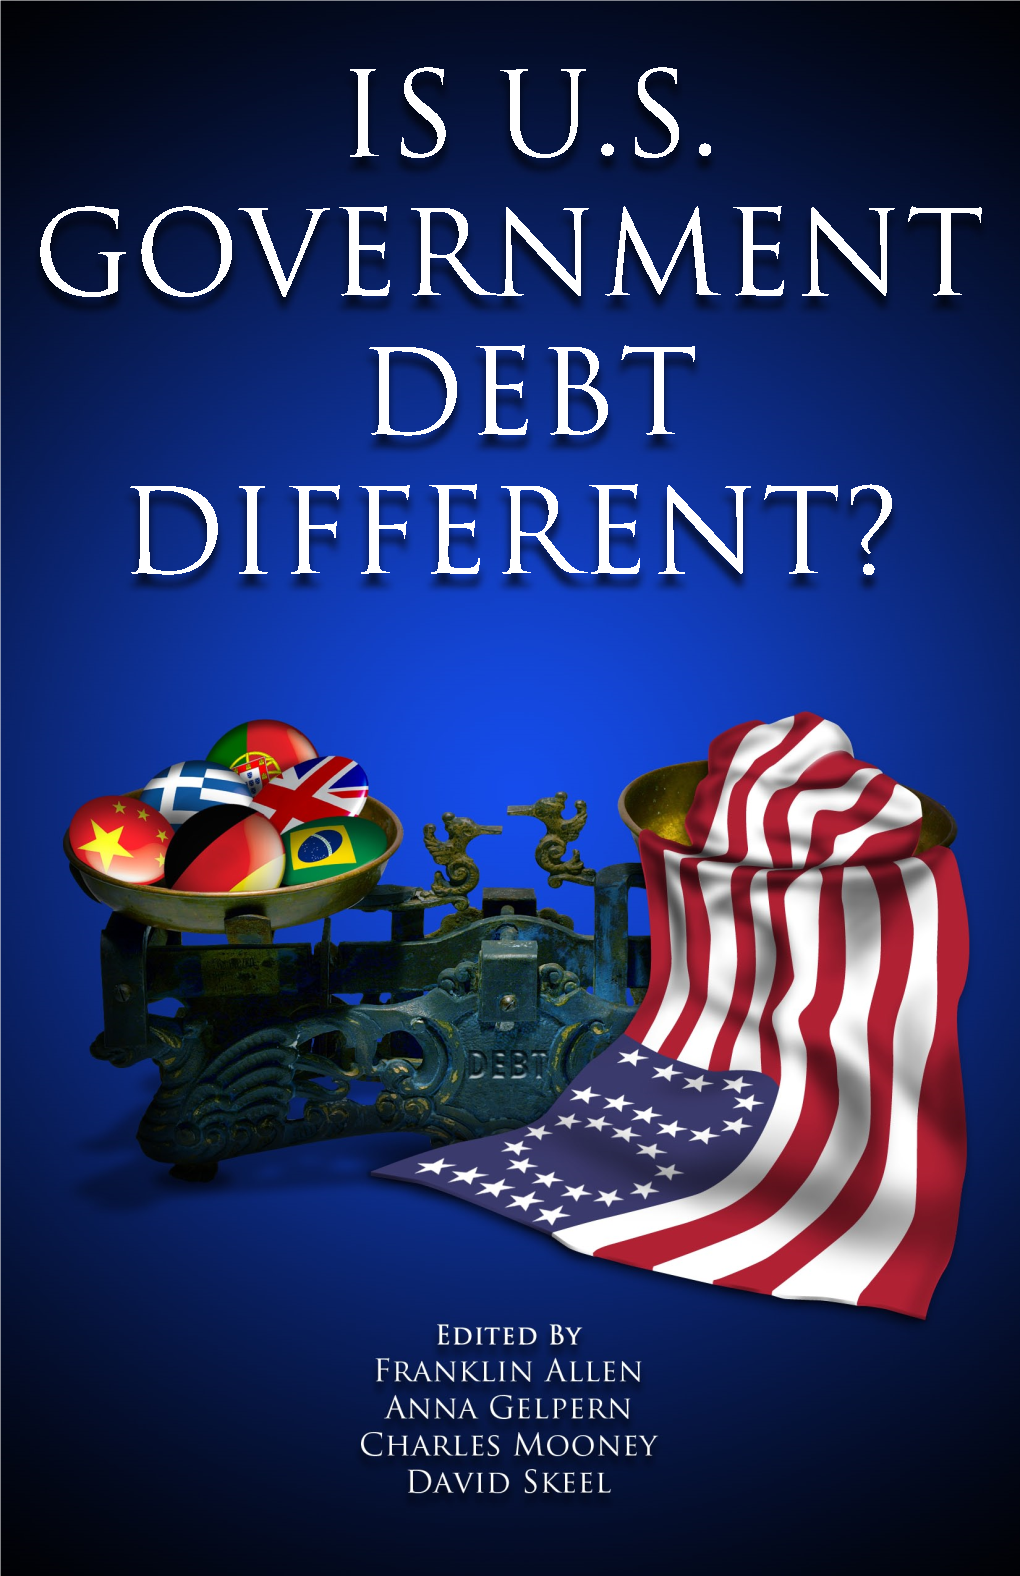 IS U.S. GOVERNMENT DEBT DIFFERENT? I